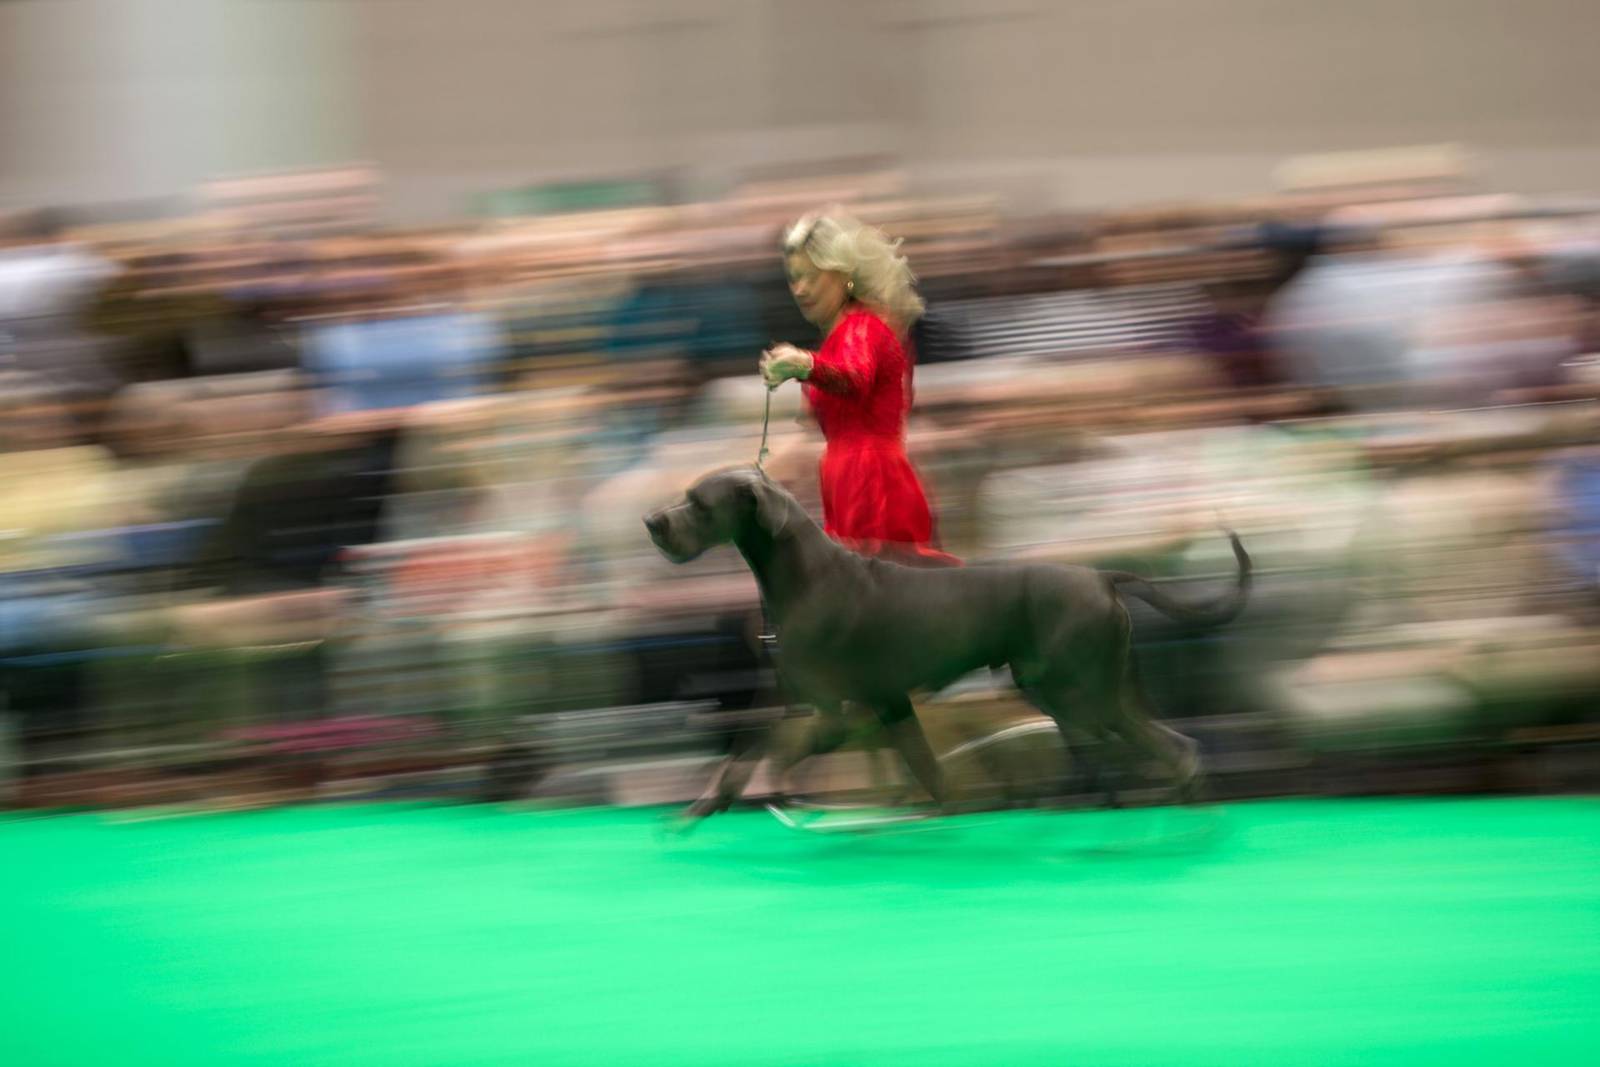 The 22 best pictures from Crufts dog show in Birmingham